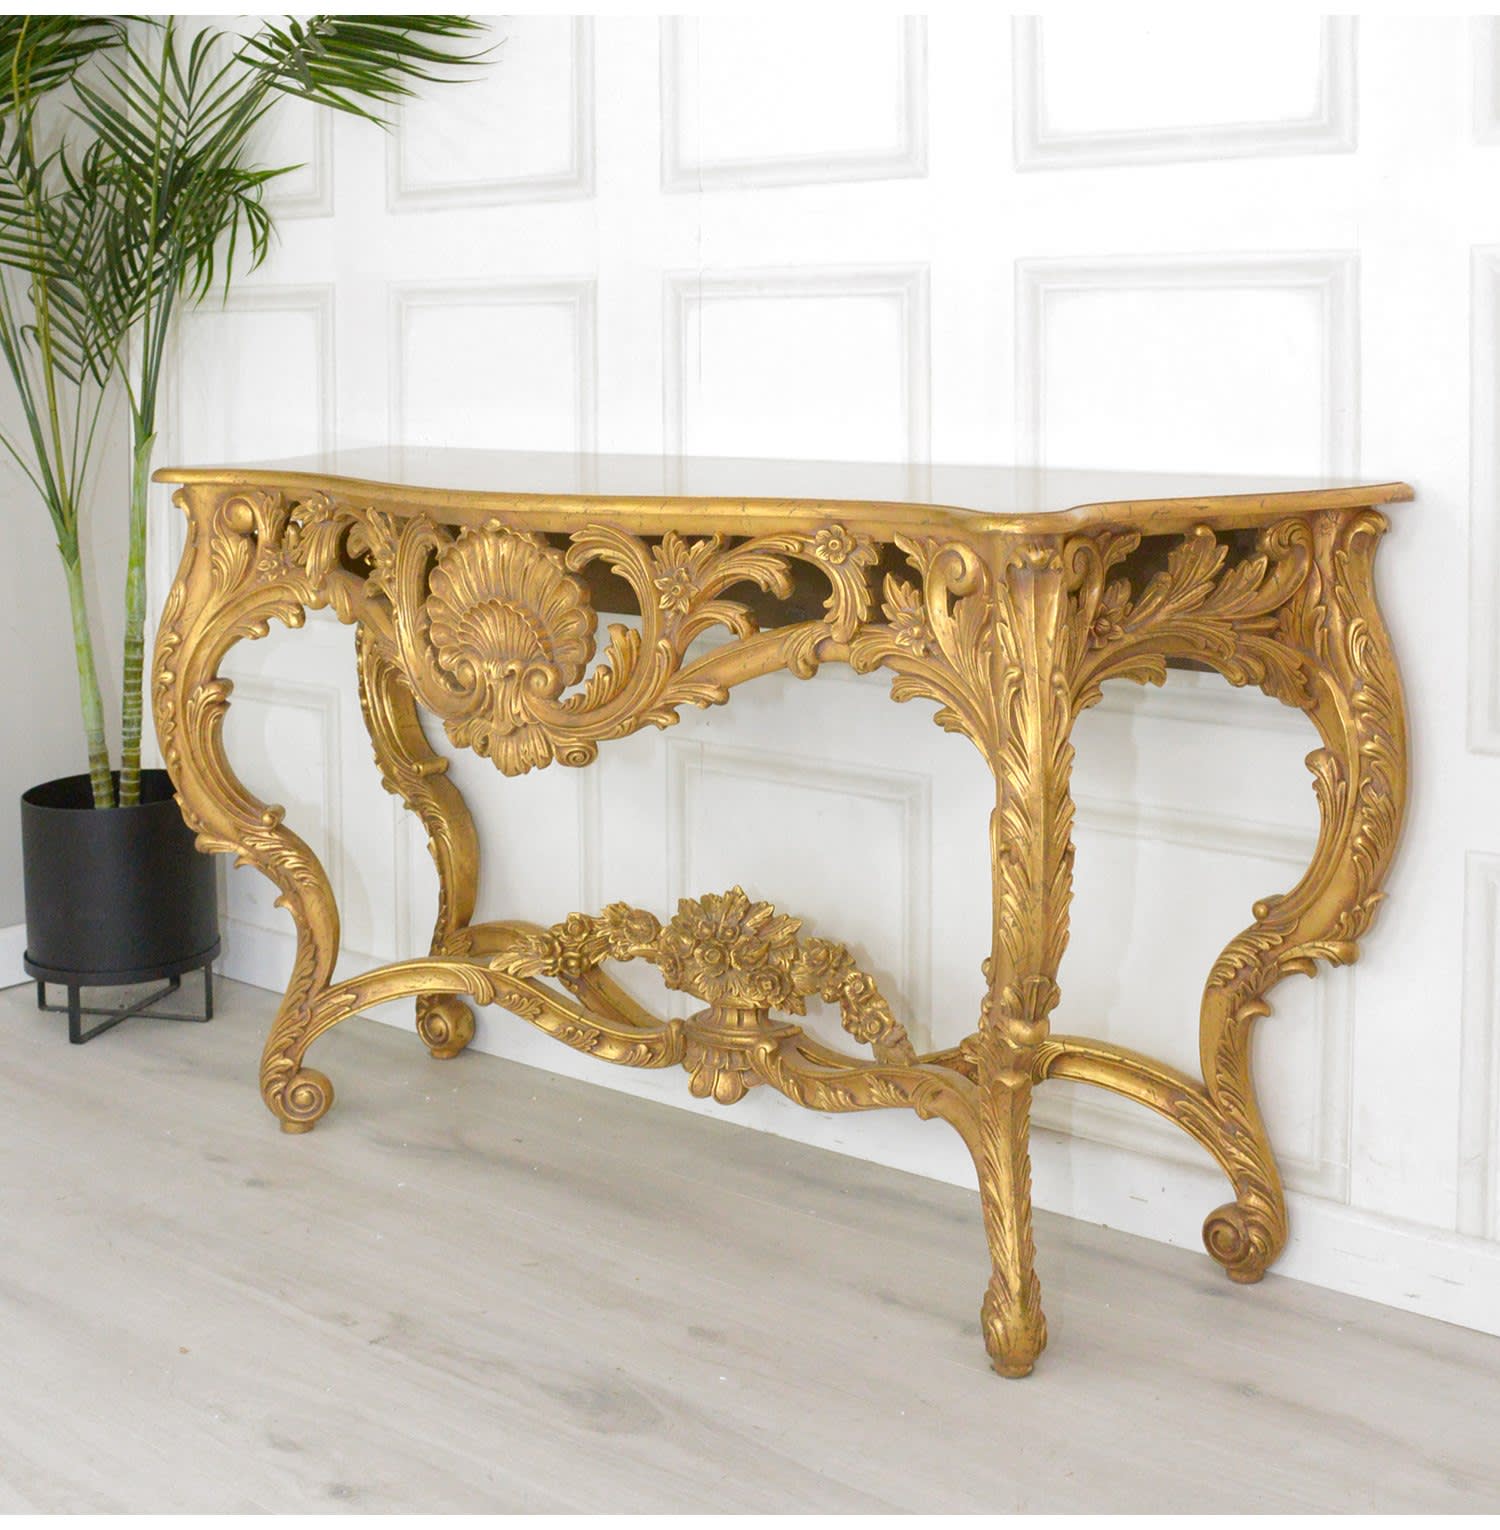 Large Gold Ornate Console Table